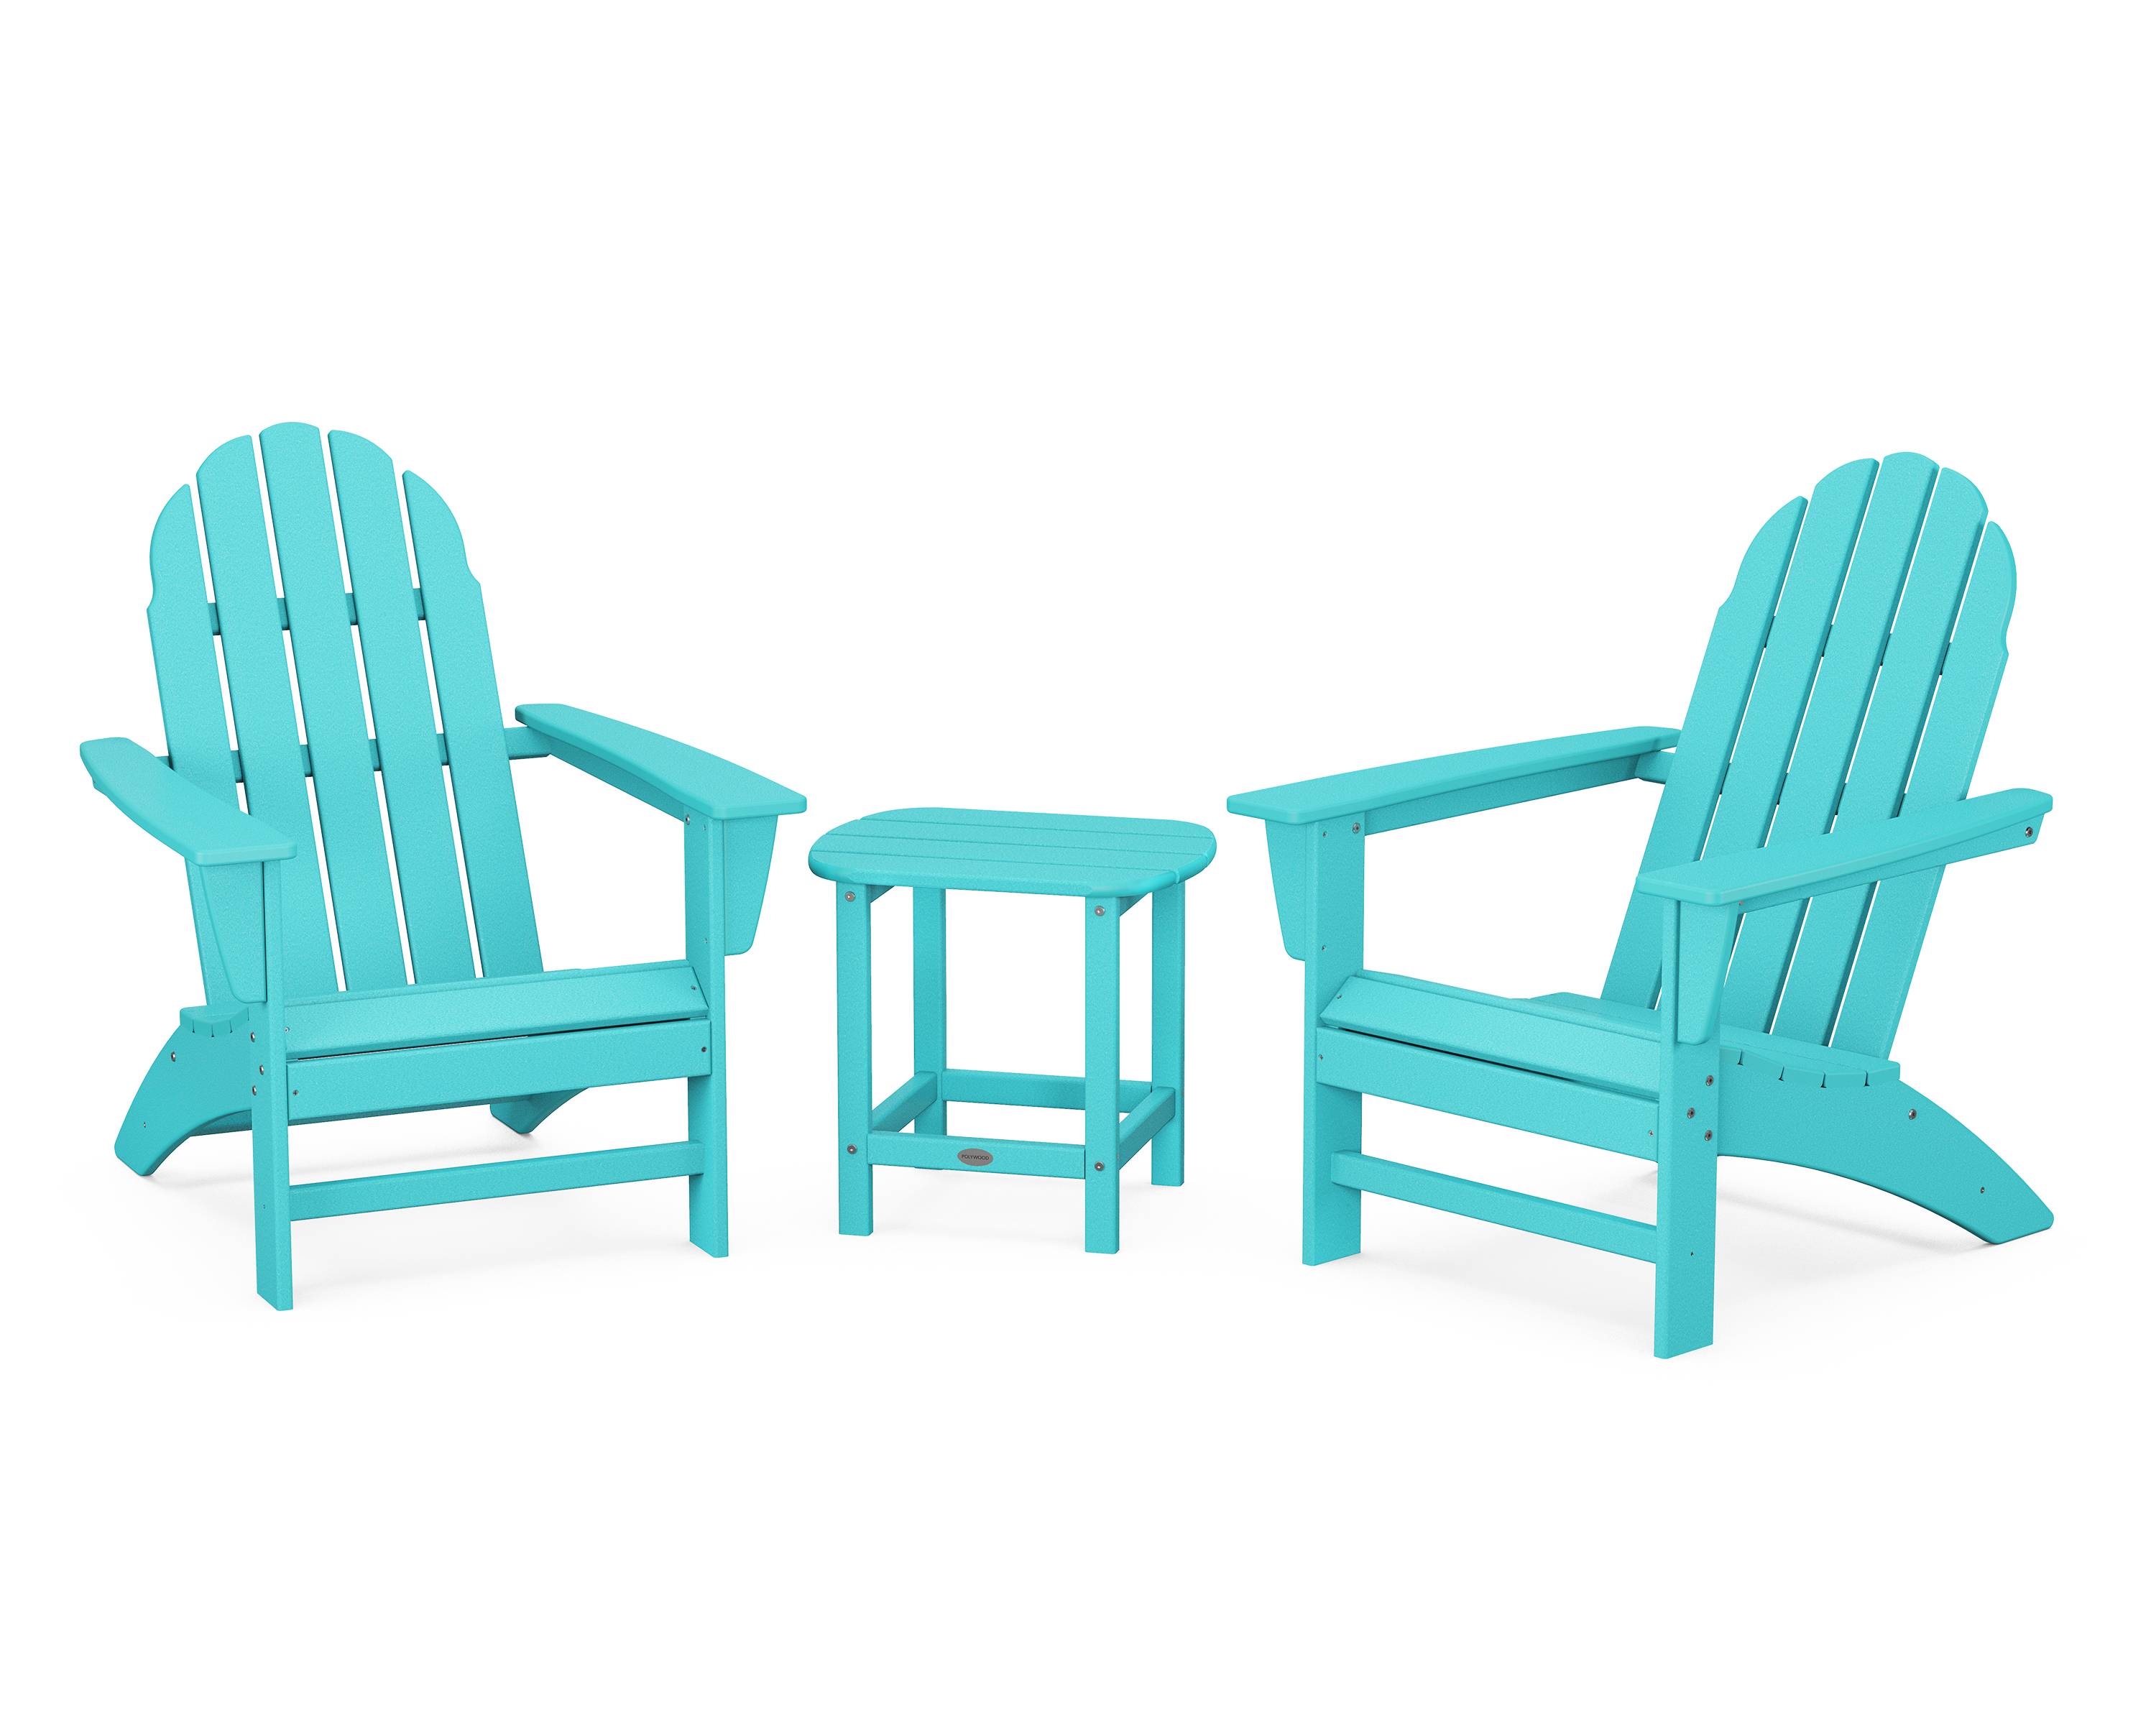 POLYWOOD Vineyard 3-Piece Adirondack Set with South Beach 18" Side Table in Aruba - image 1 of 1